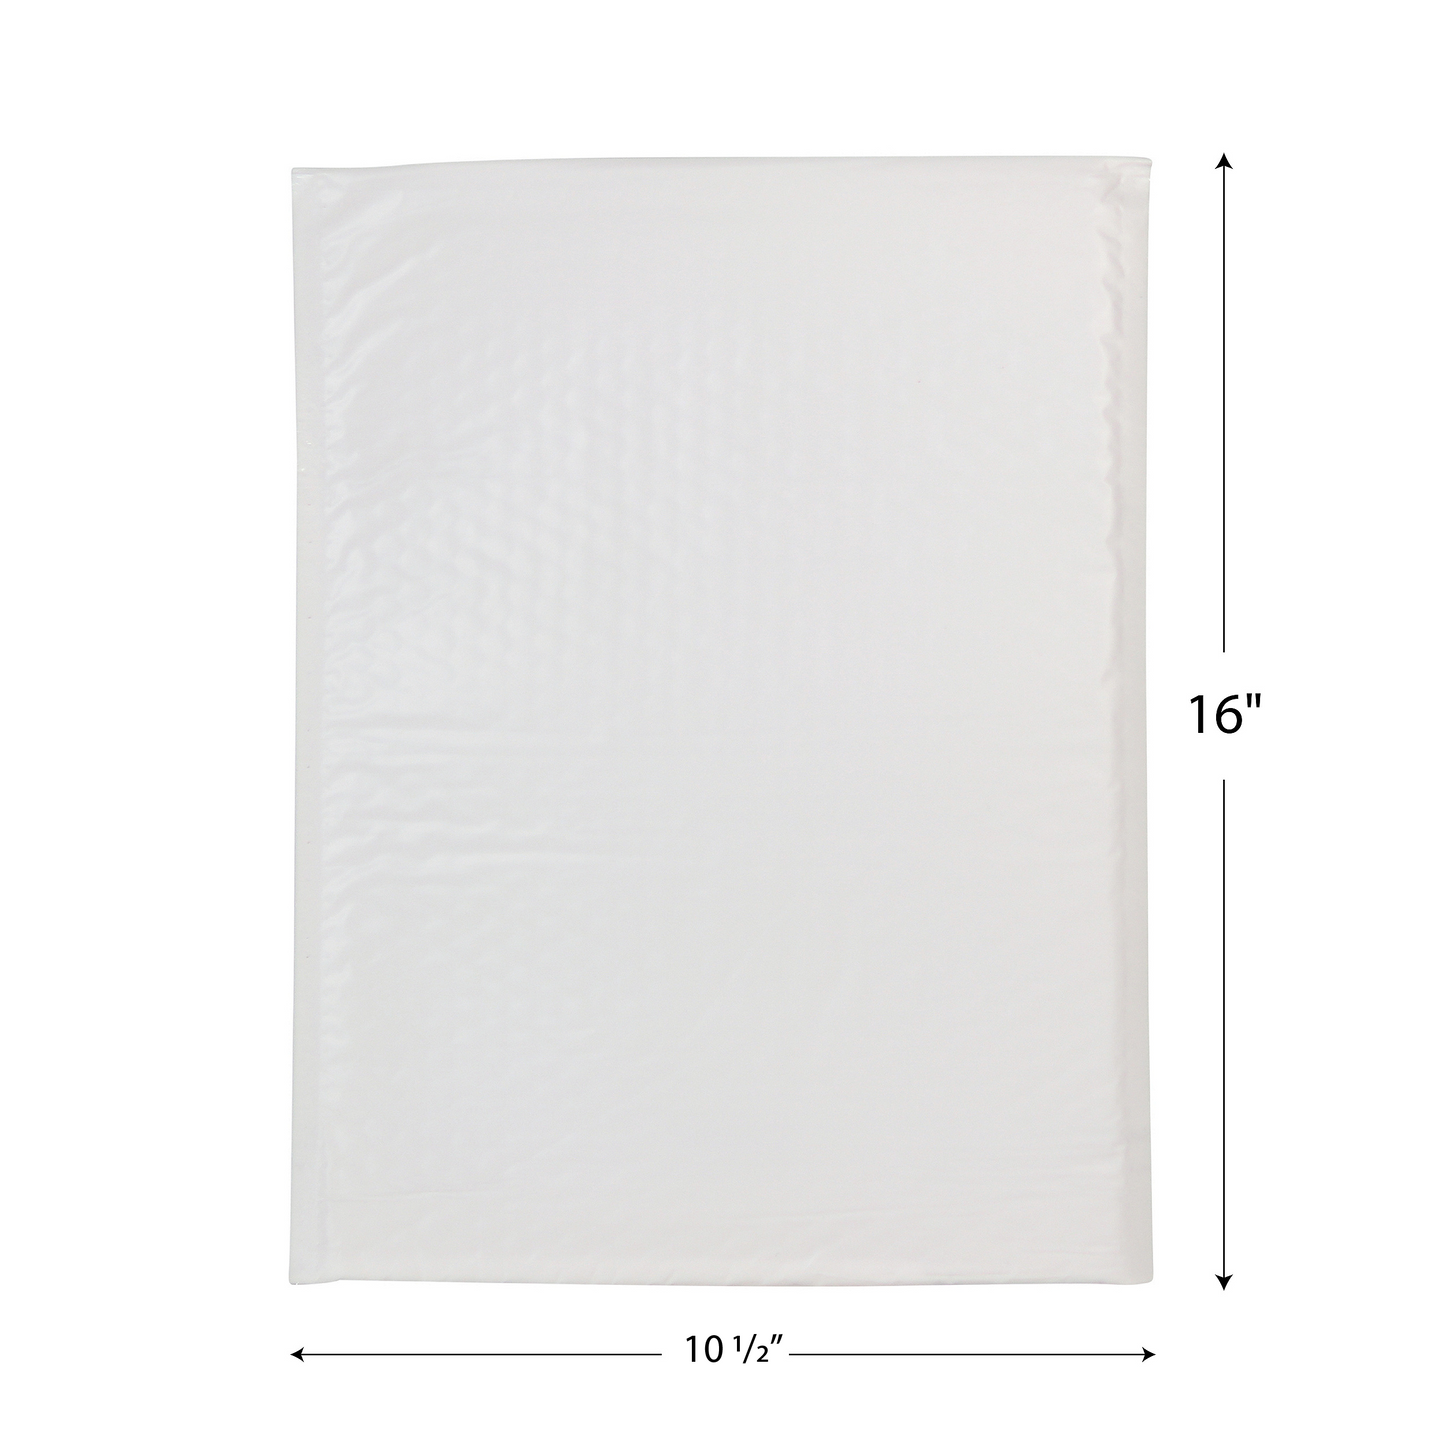 BUBBLE WRAP® Brand Cushioned Poly Mailers (Jiffy® Tuffgard® White)